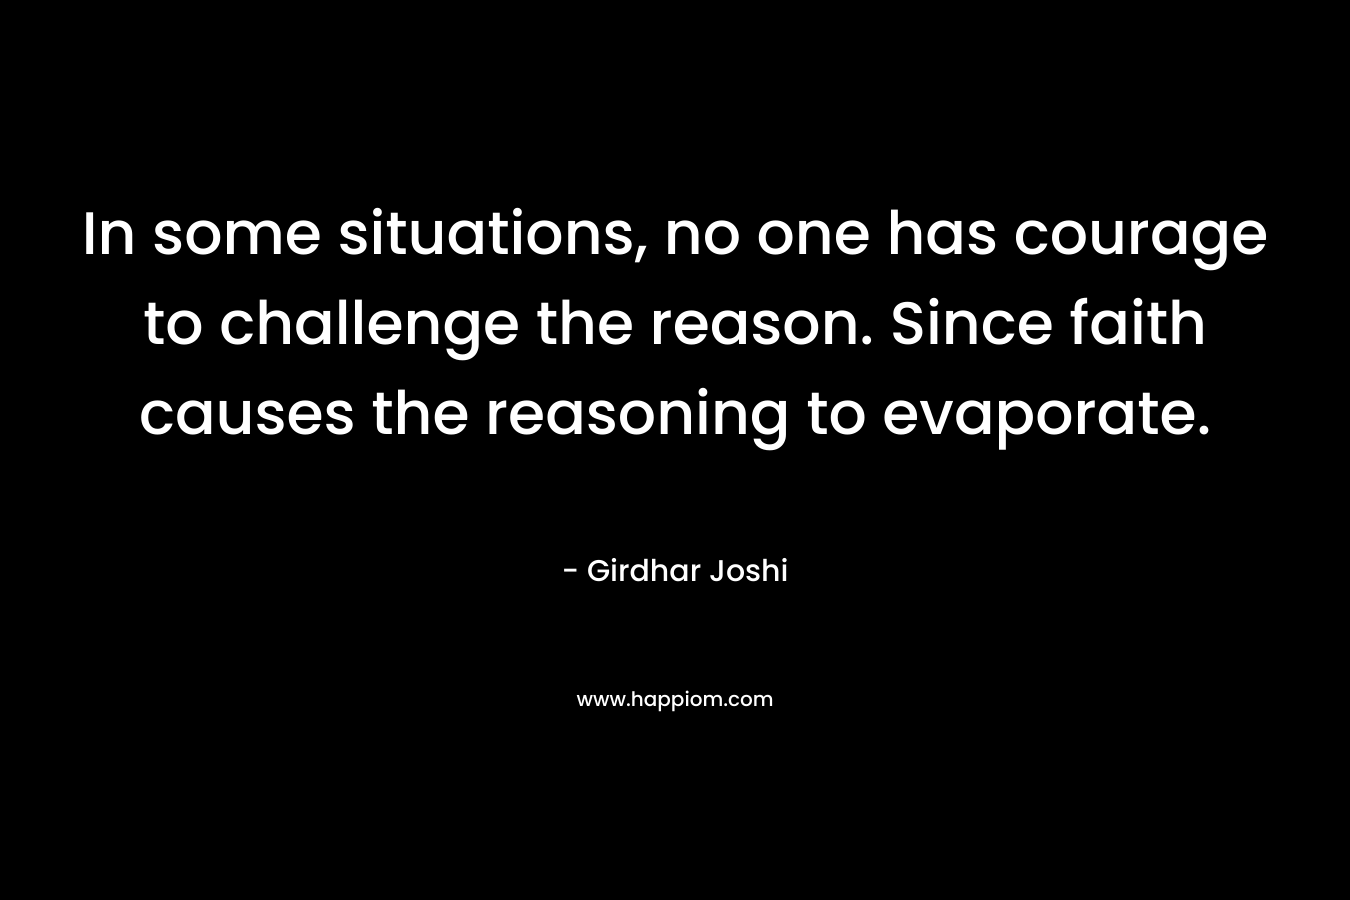 In some situations, no one has courage to challenge the reason. Since faith causes the reasoning to evaporate.